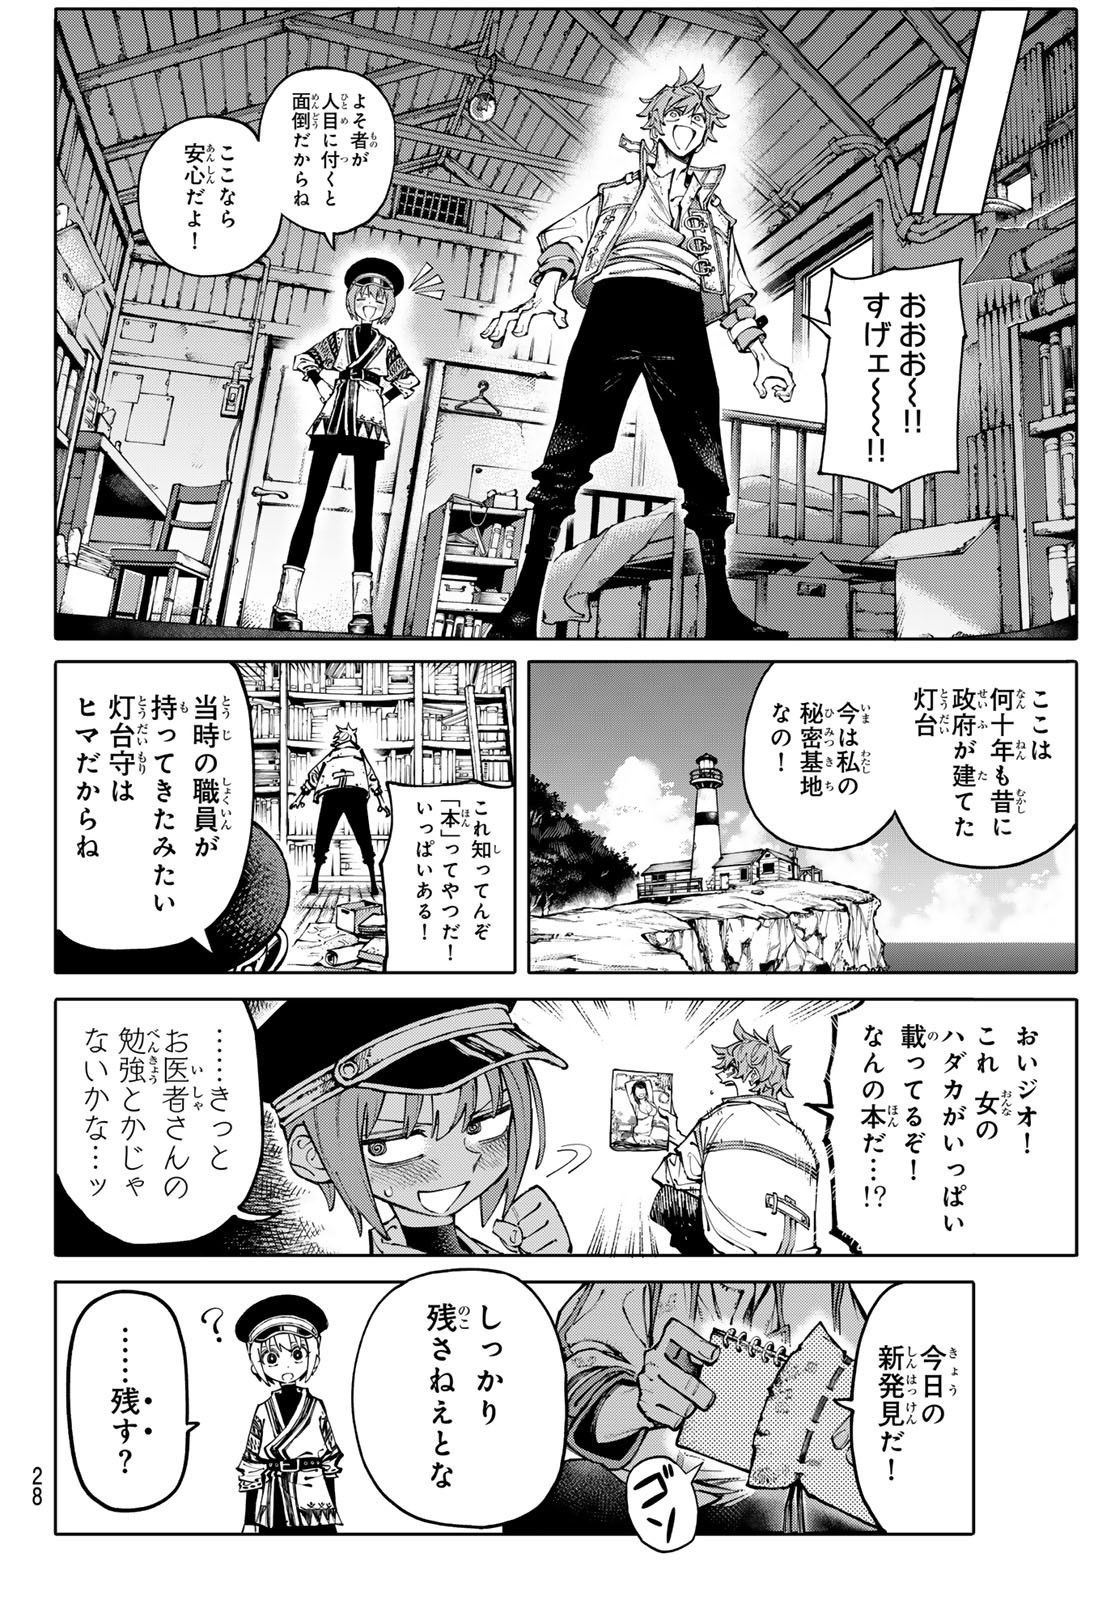 Weekly Shōnen Magazine - 週刊少年マガジン - Chapter 2024-33 - Page 26